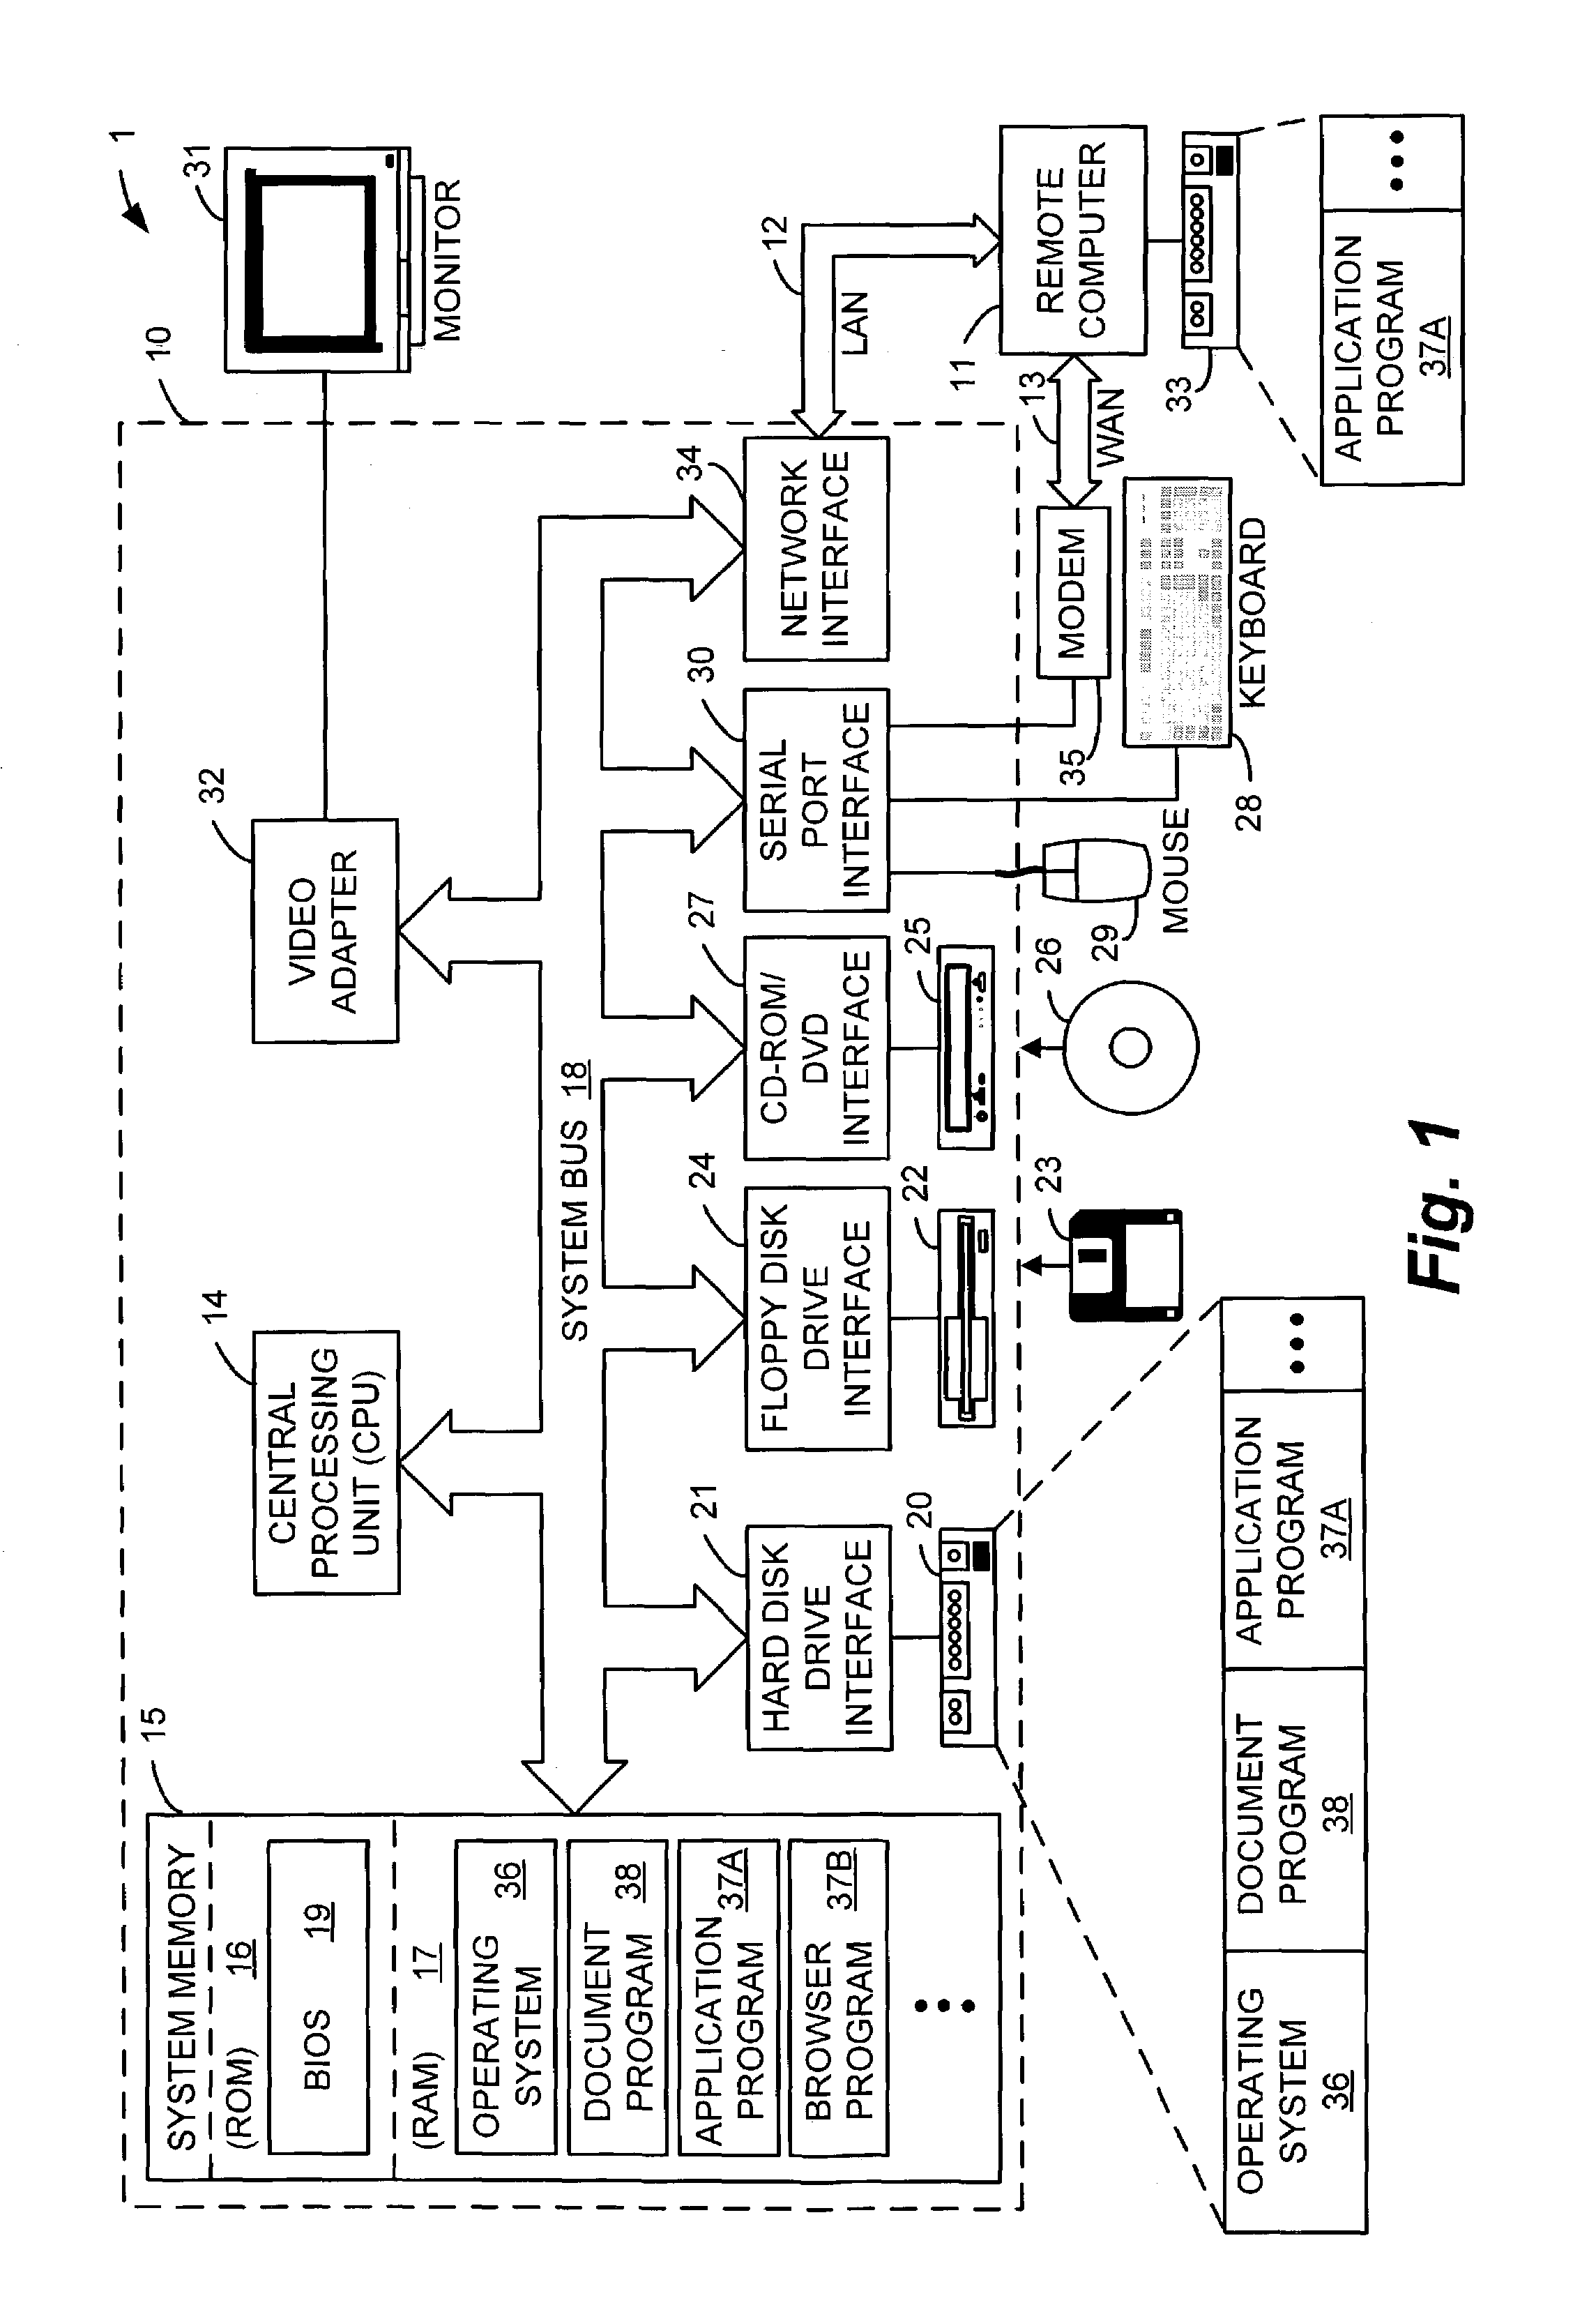 Method and system for selecting elements in a graphical user interface